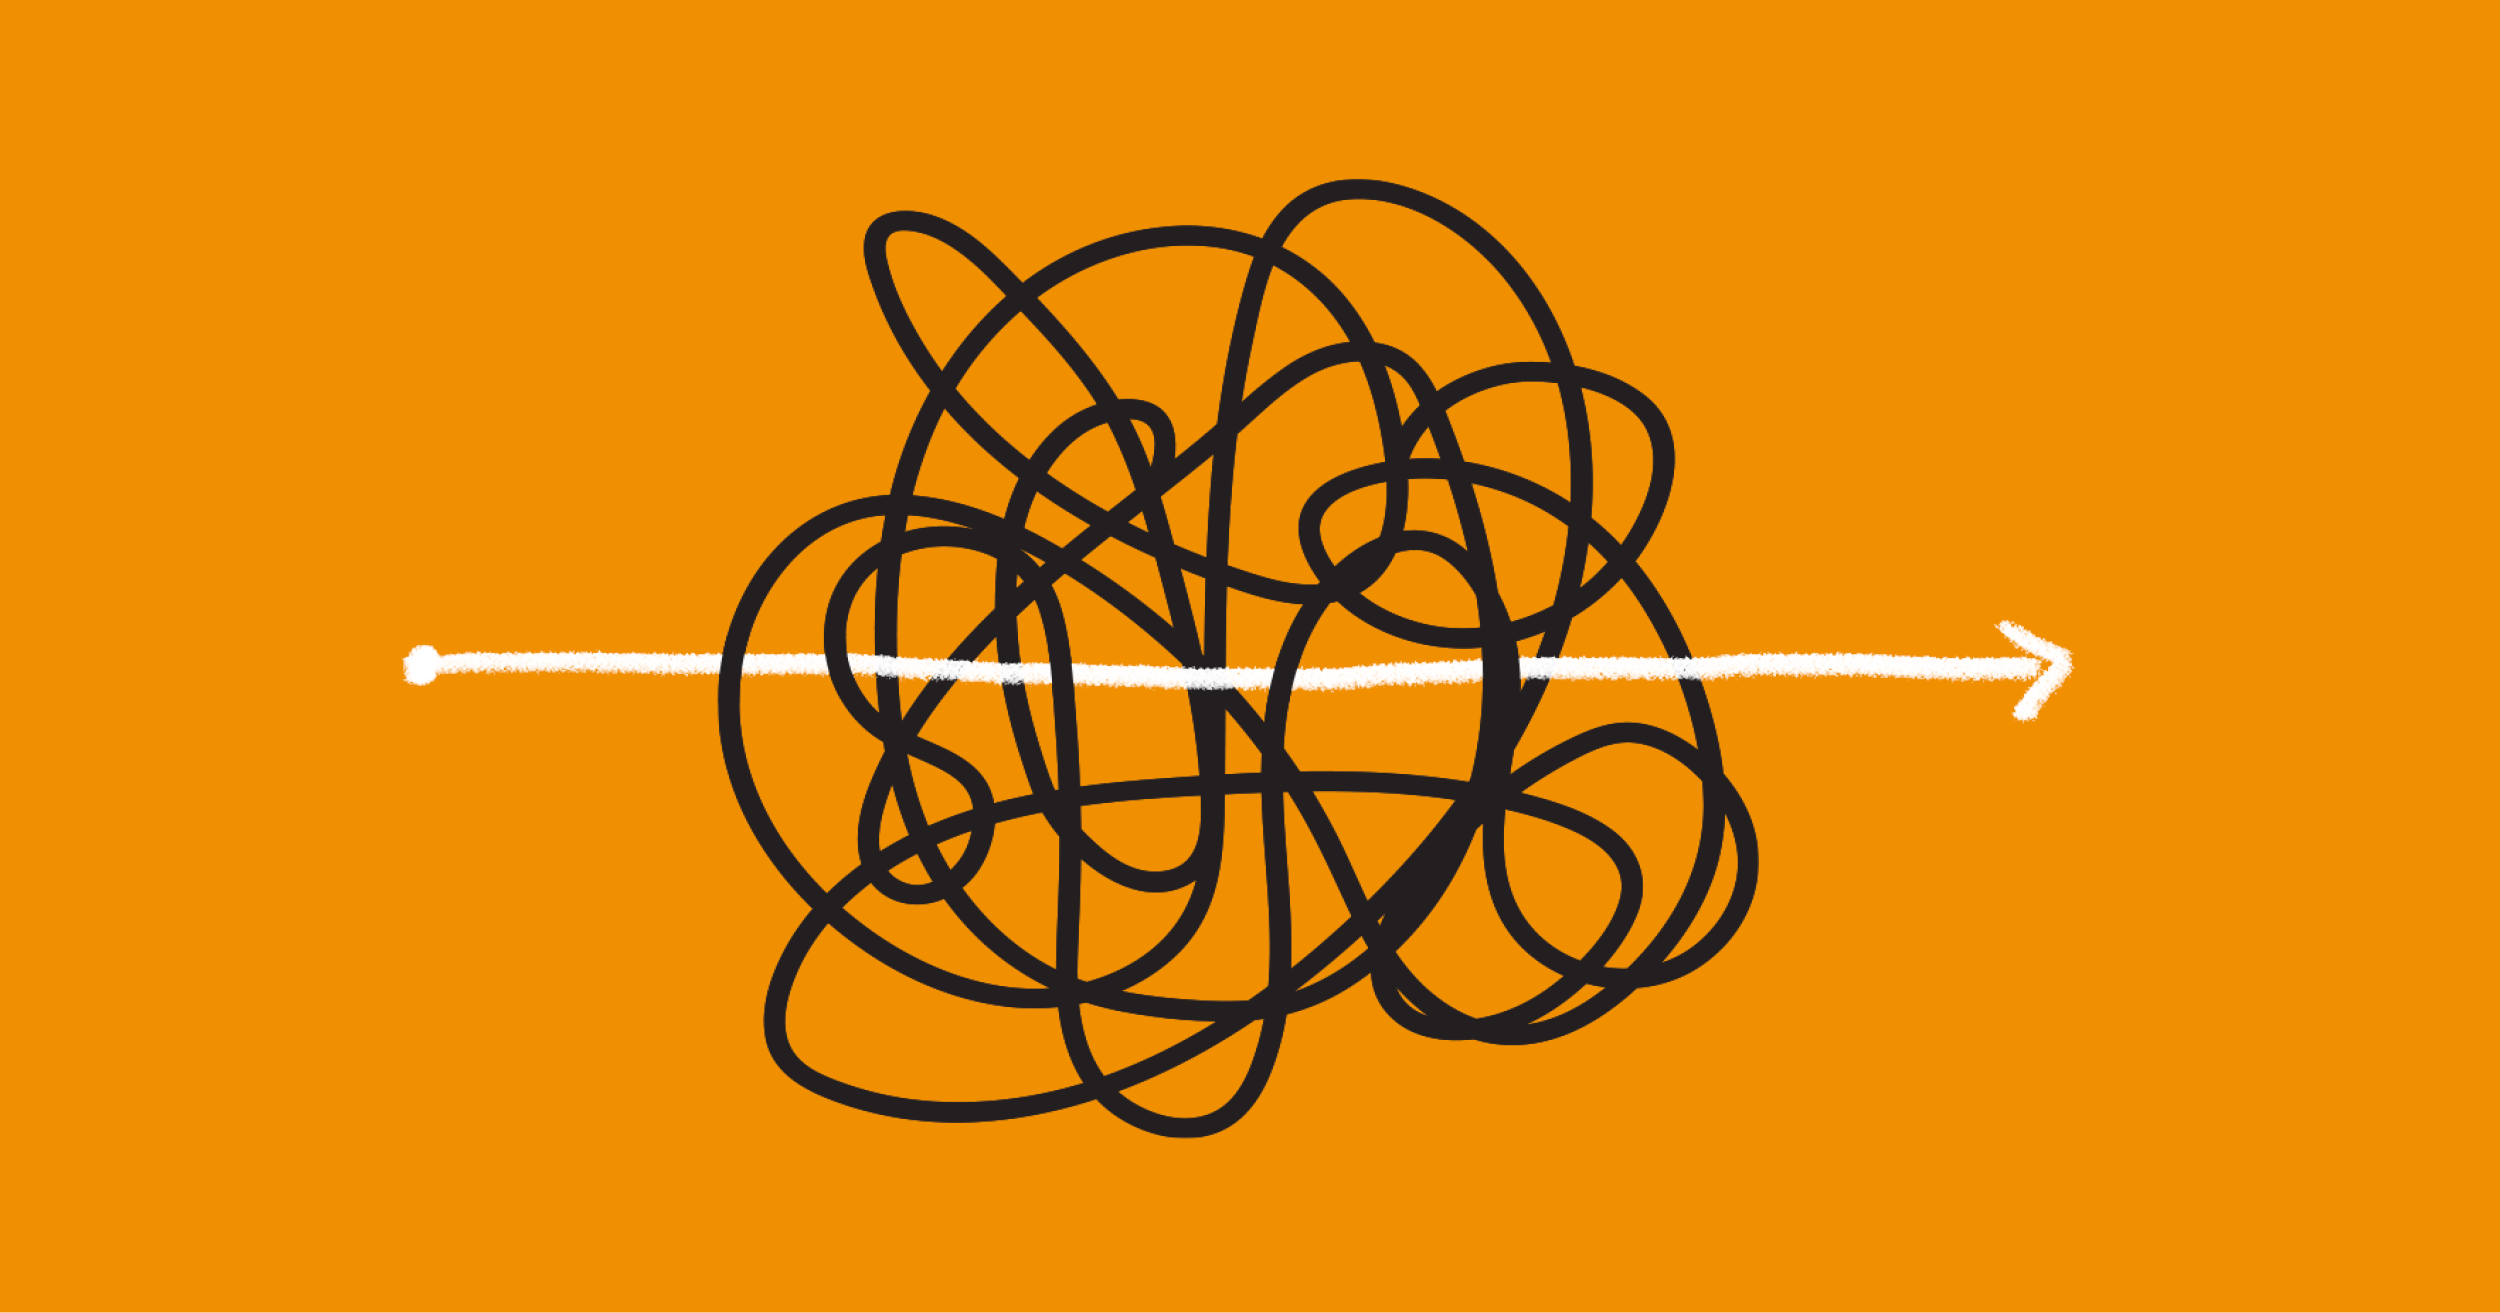 A heavily tangled ball of black lines, with a white line going straight through the middle, against an orange background.